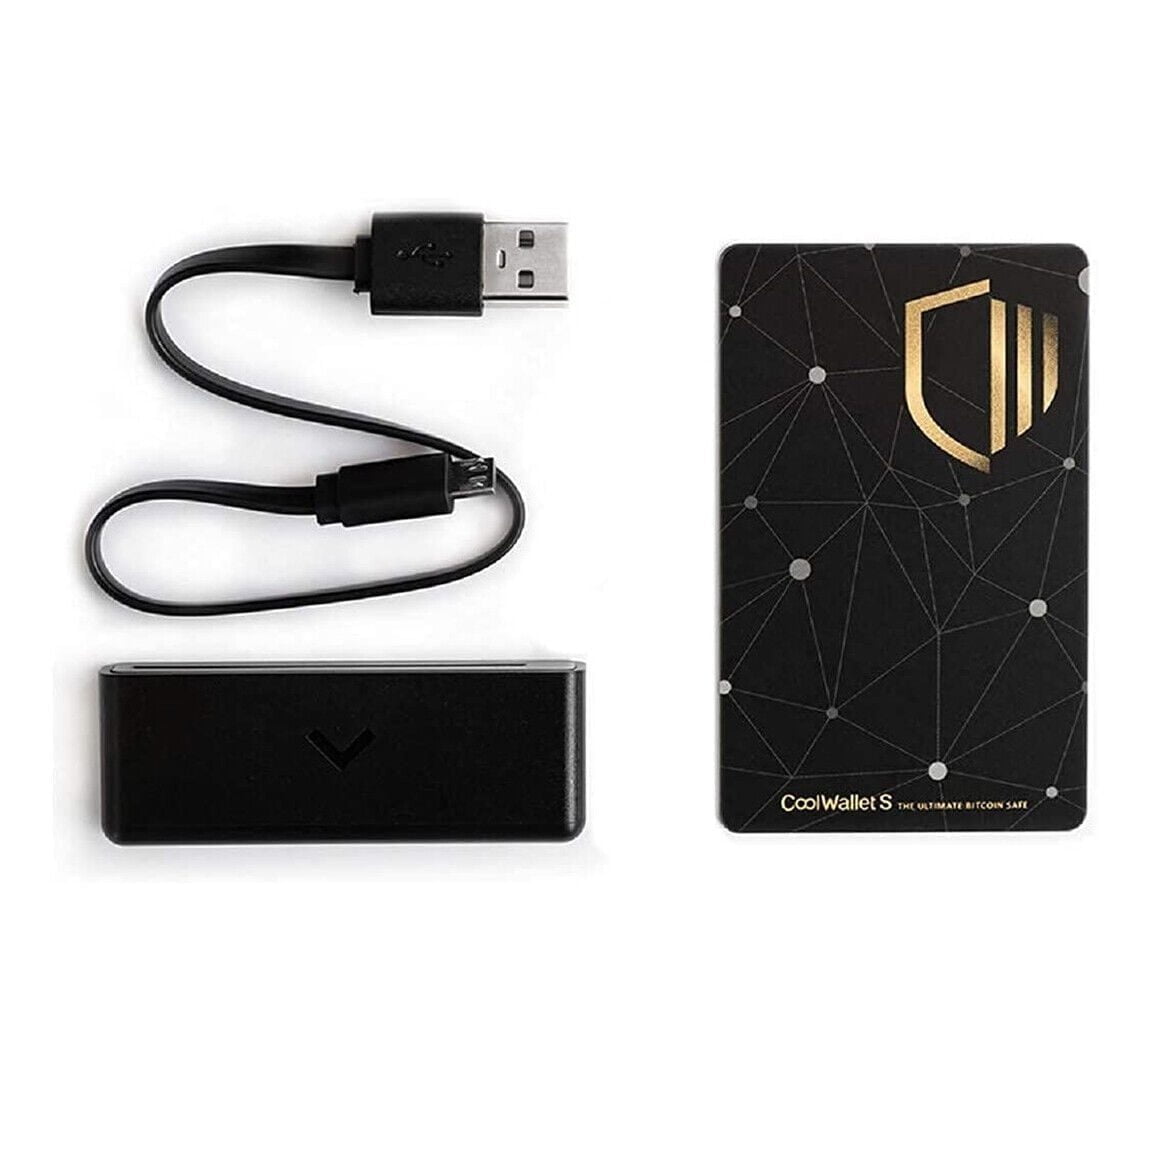 coolwallet: Bluetooth hardware wallet for cryptocurrency.